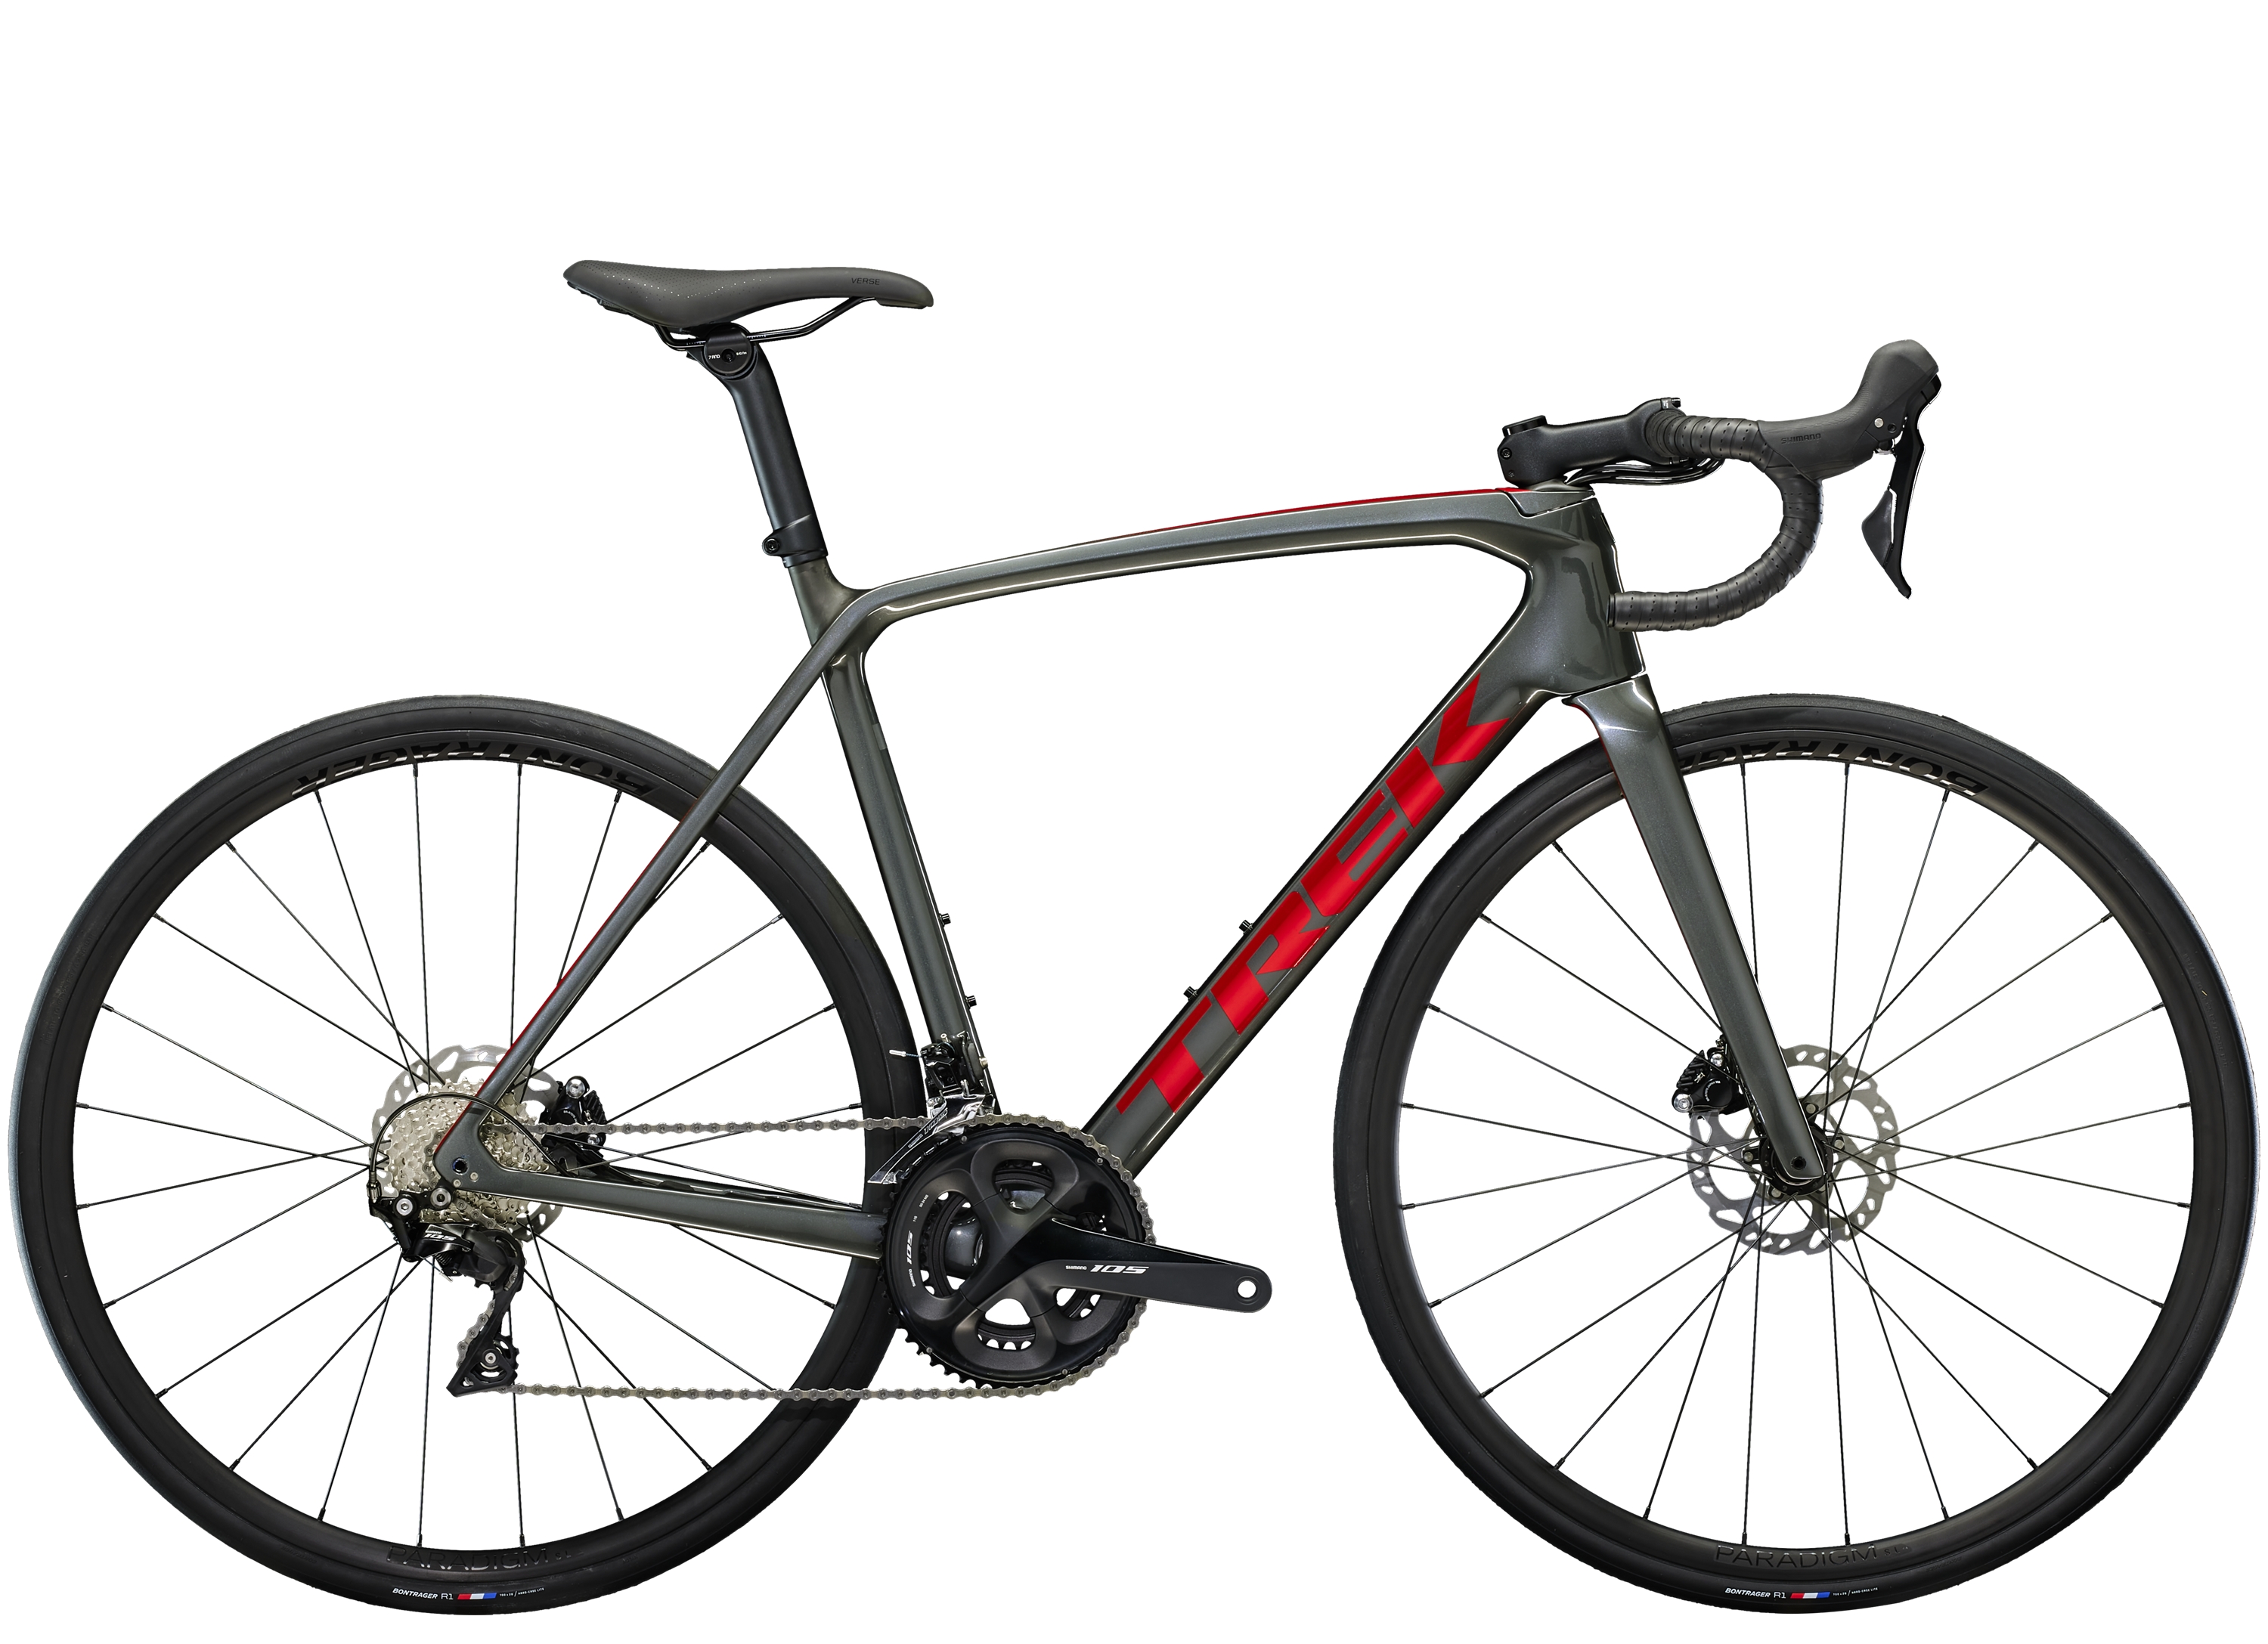 <a href="https://cycles-clement.be/product/emonda-sl-5-47-lithium-grey/">EMONDA SL 5 47 LITHIUM GREY</a>